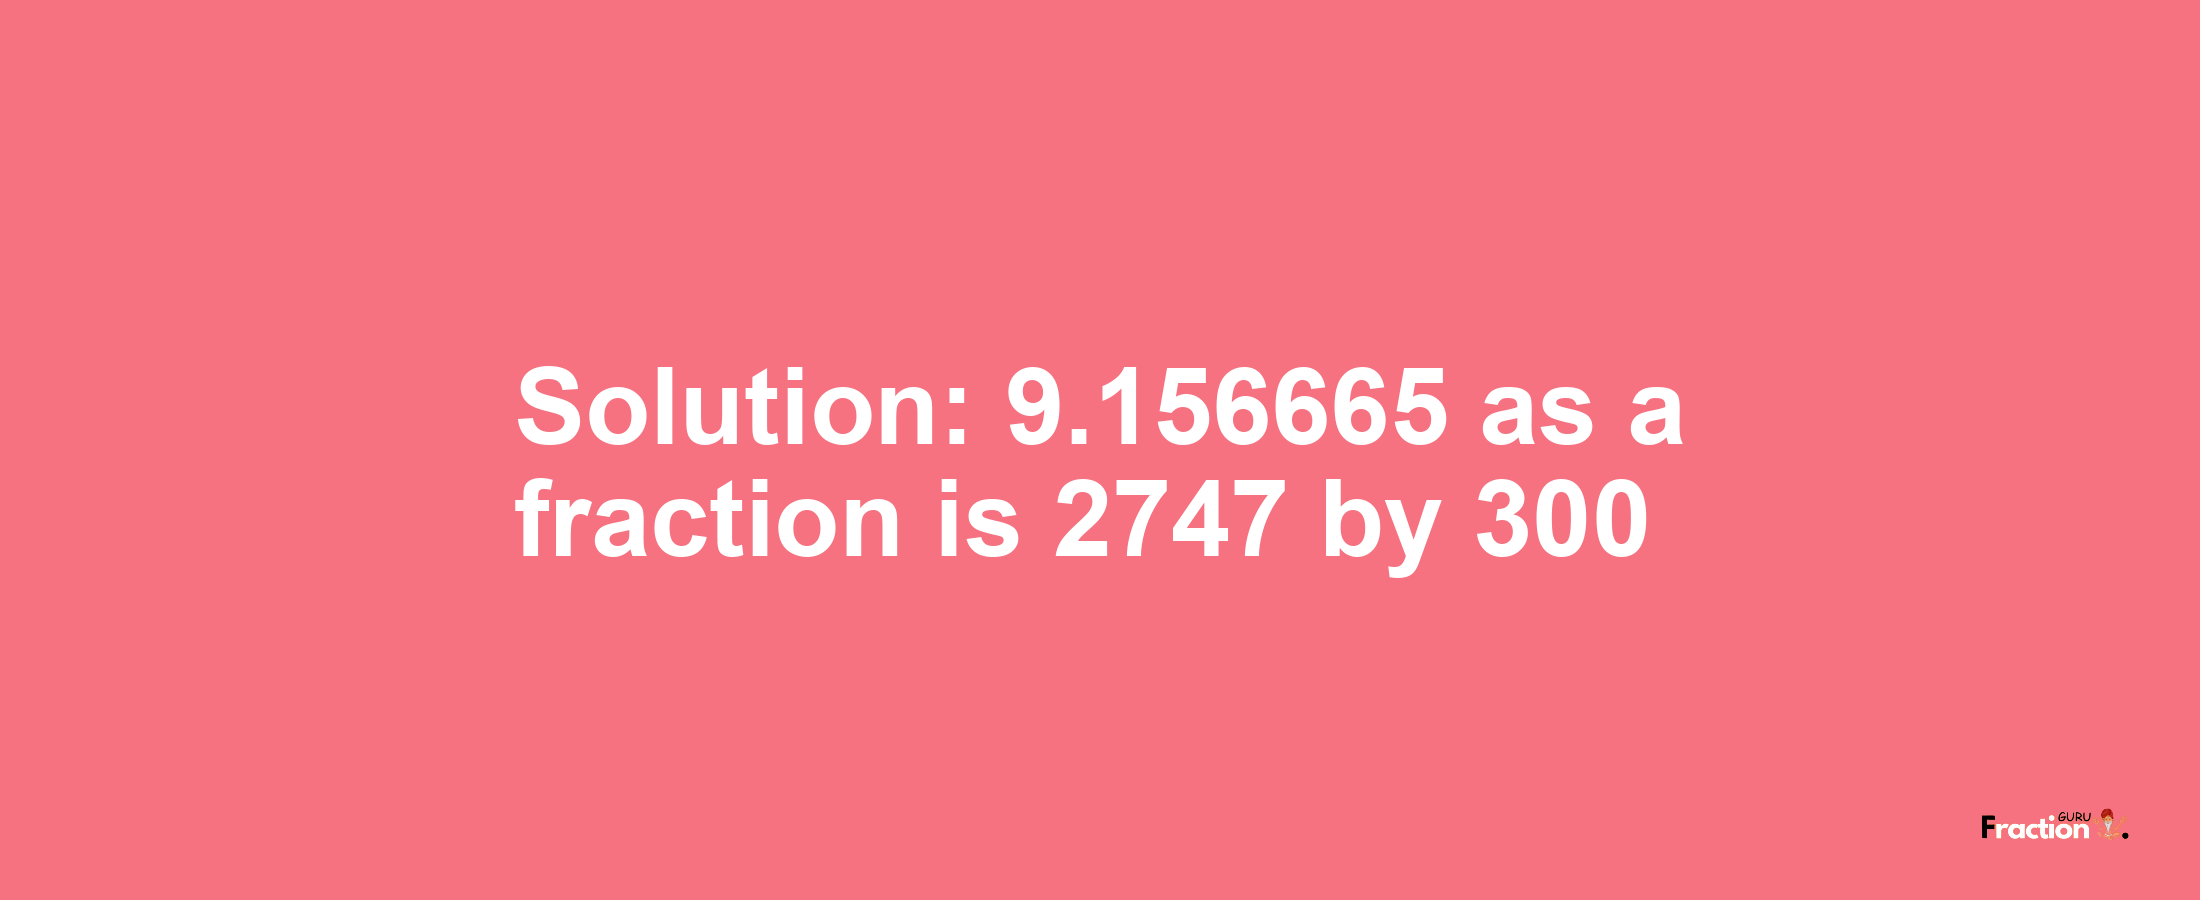 Solution:9.156665 as a fraction is 2747/300